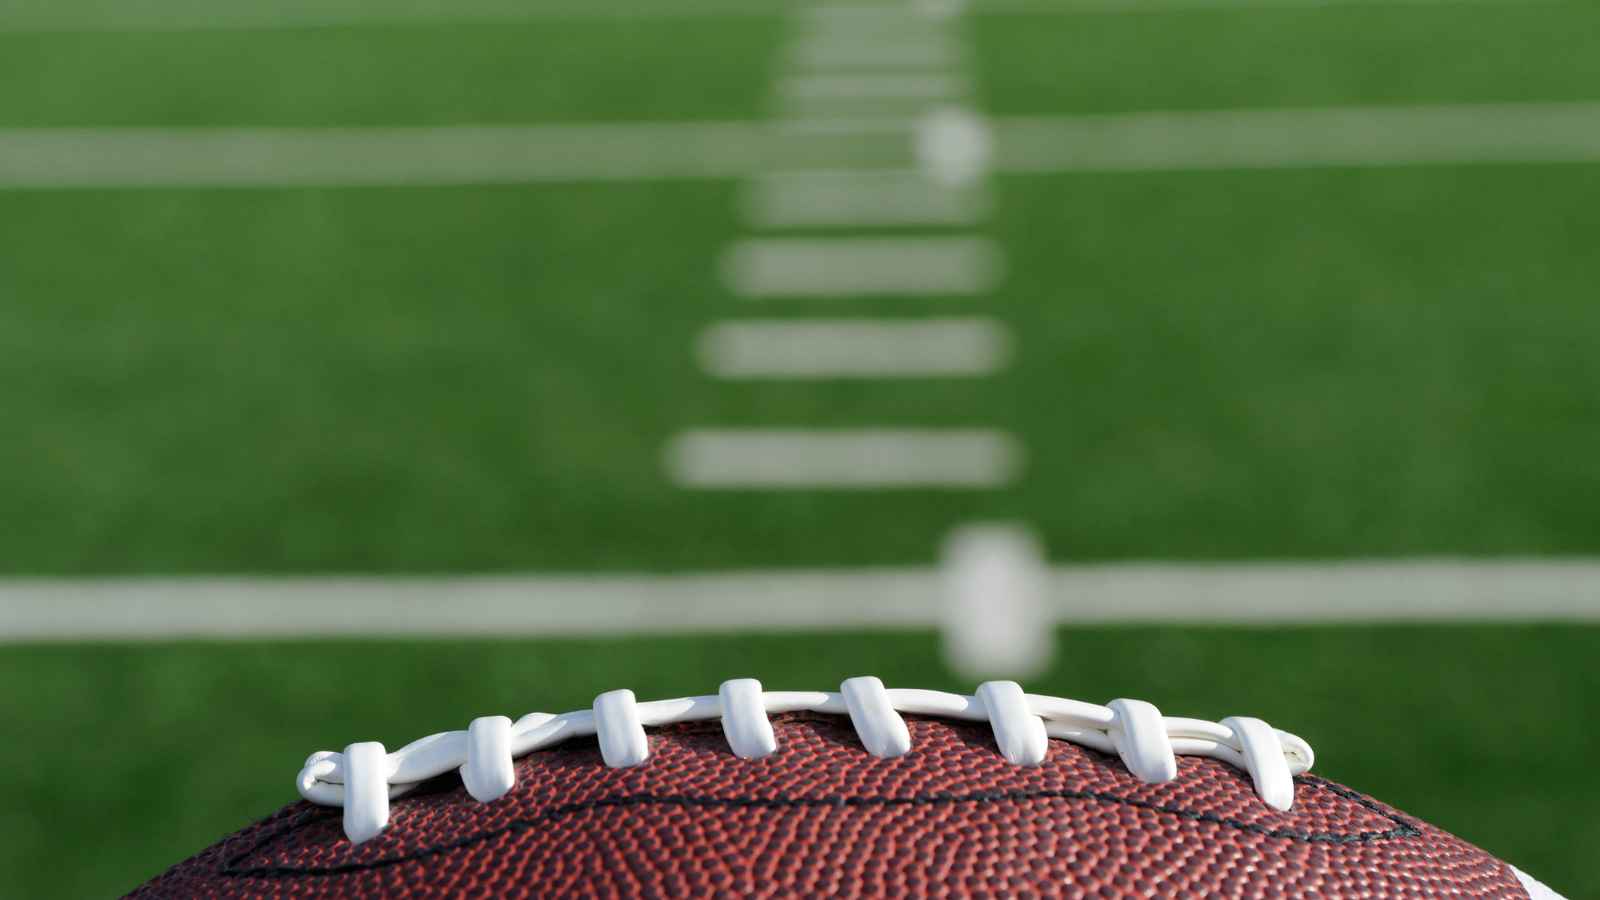 Professional Athletes Seek Workers' Compensation